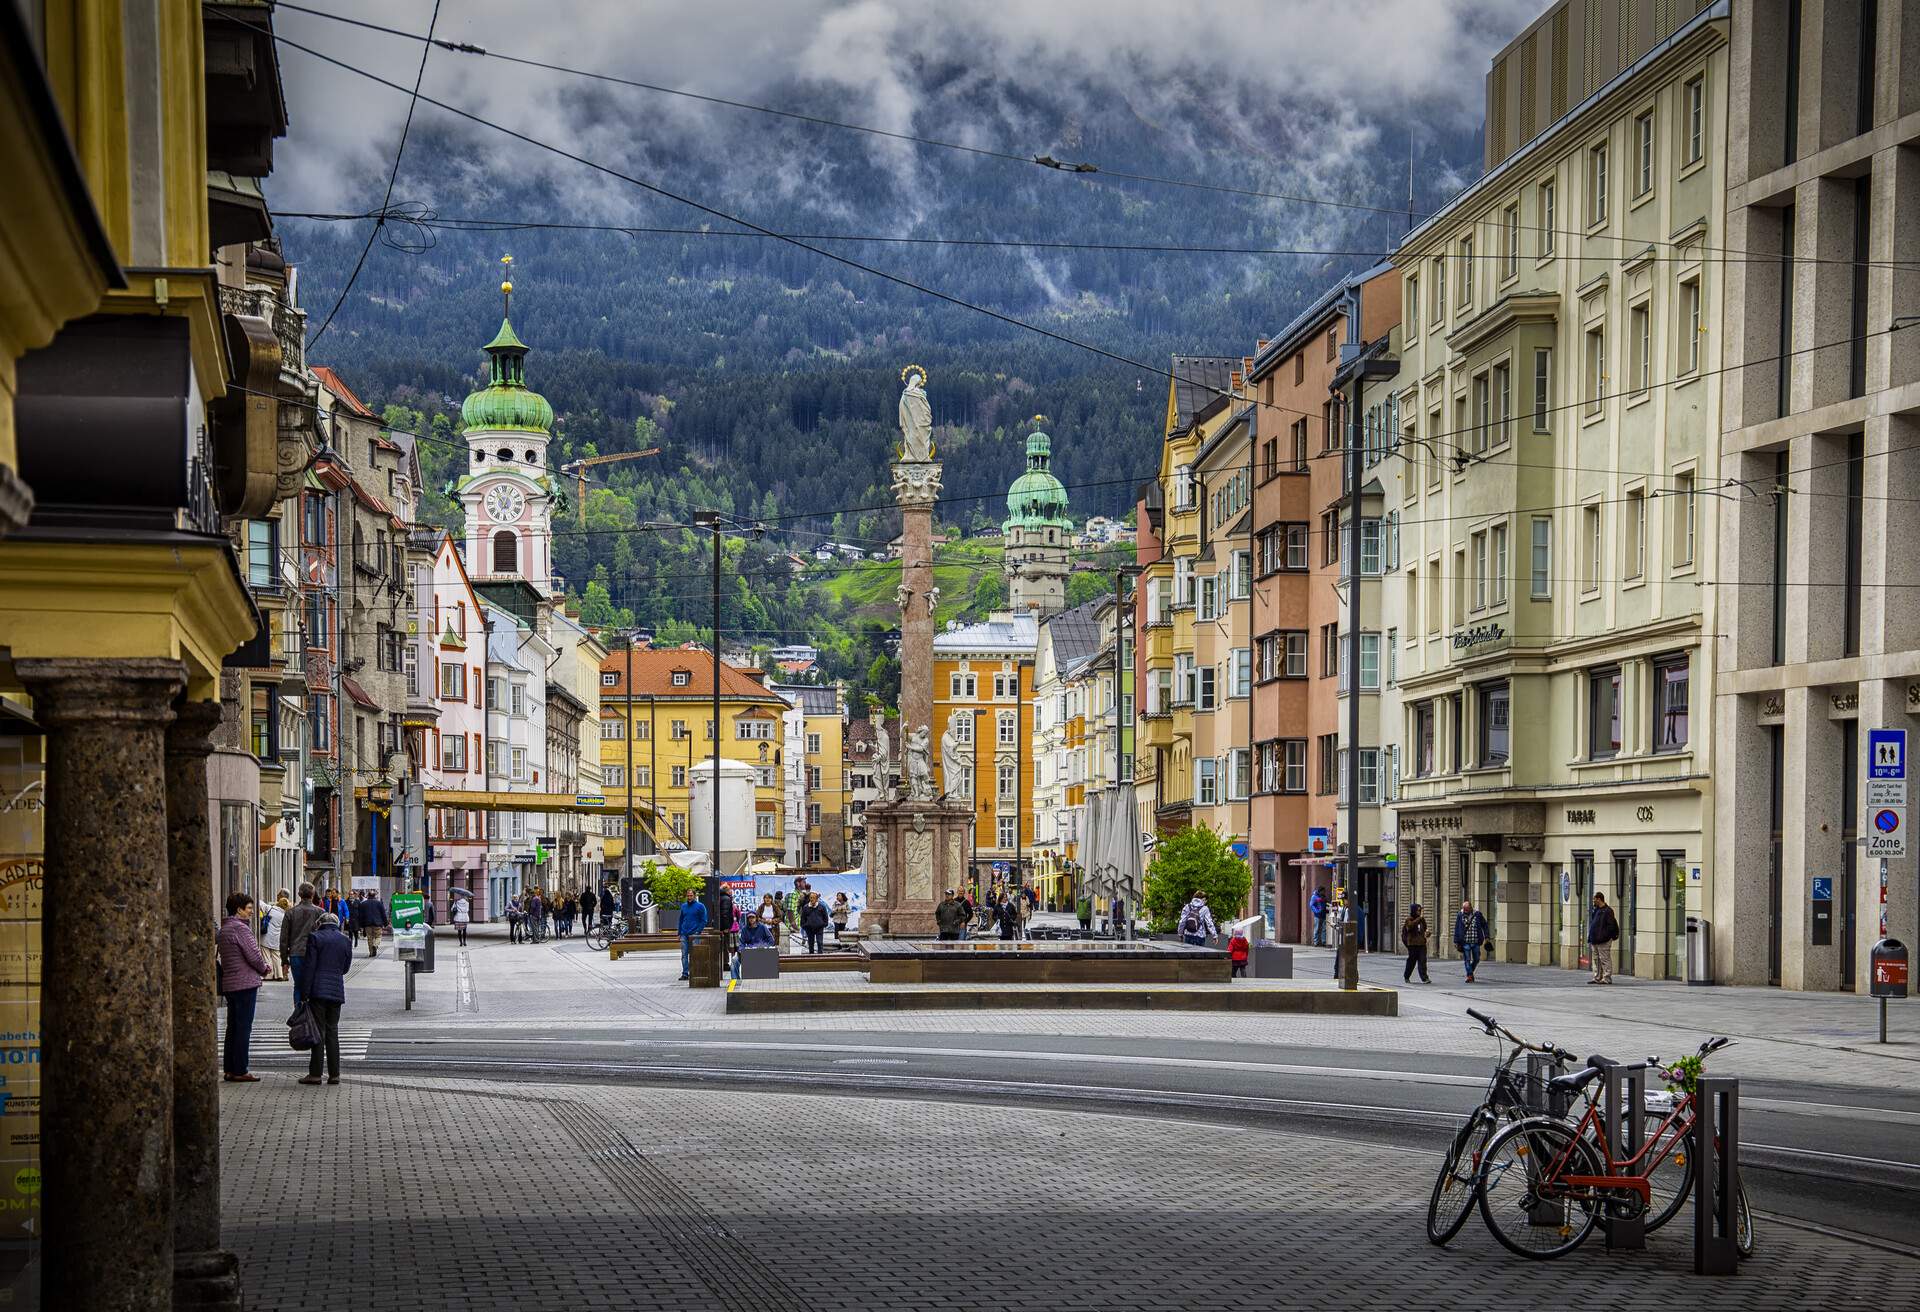 Market square of Old town of Innsbruck, Austria 